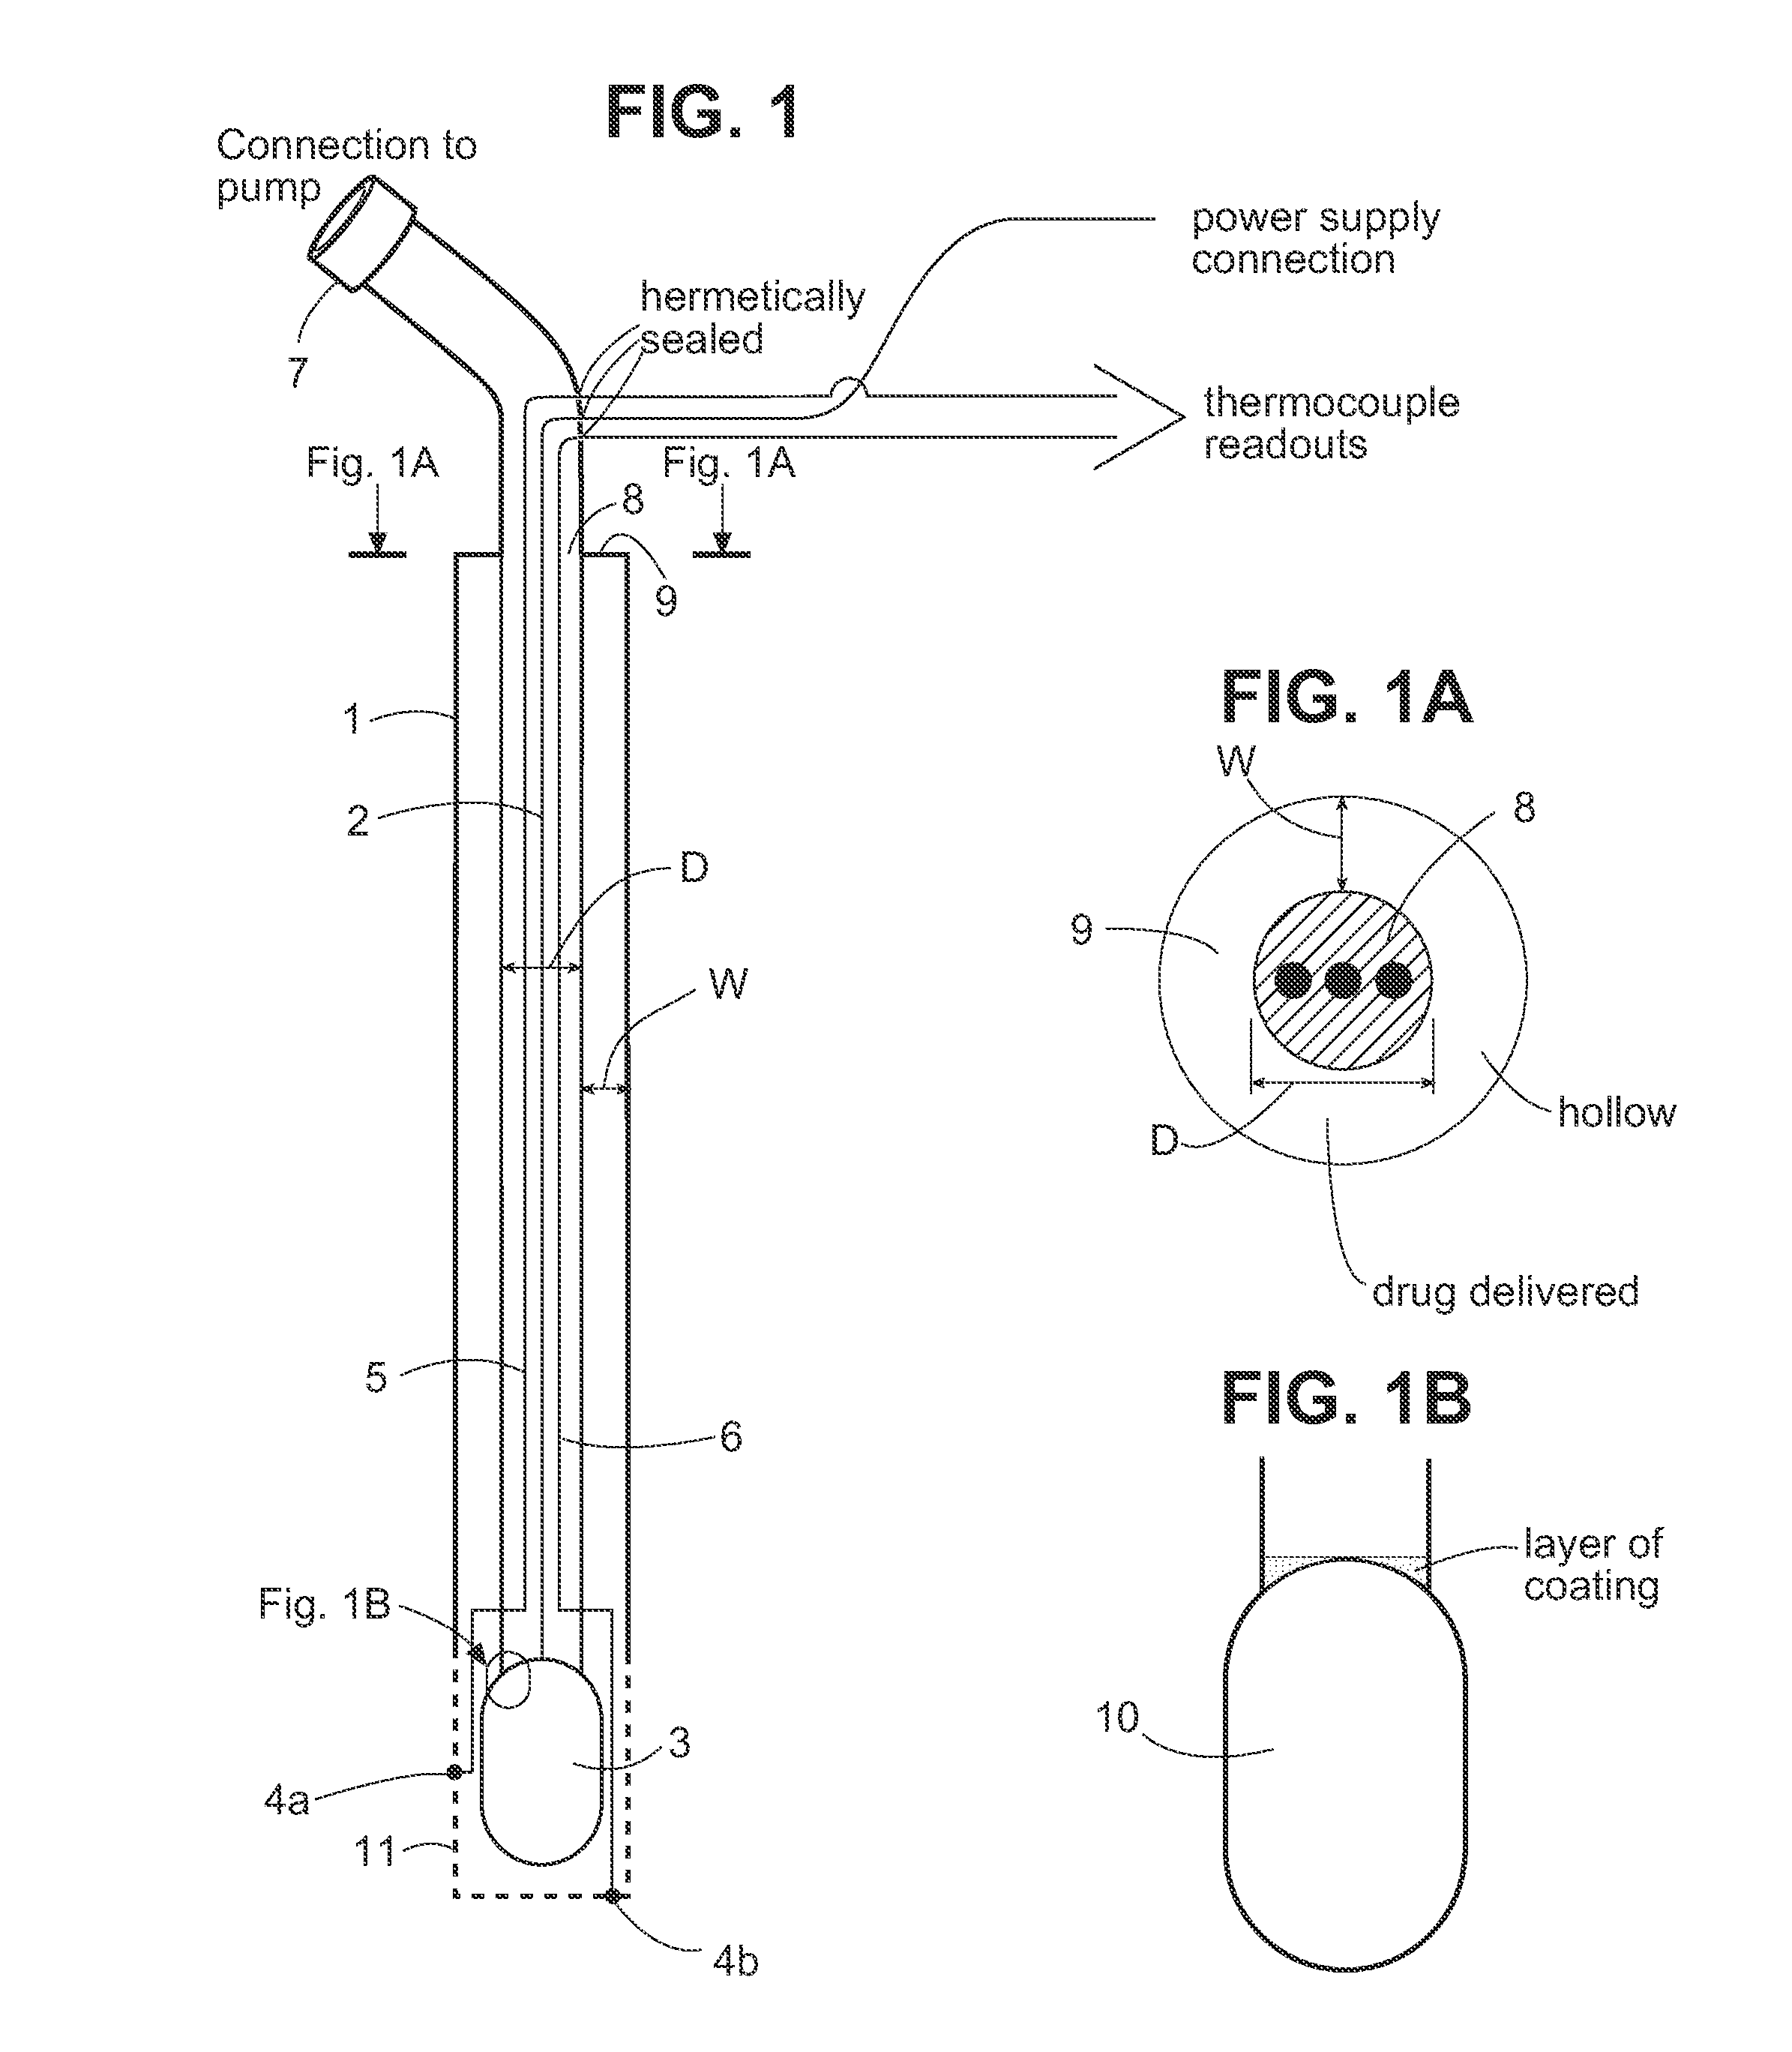 Apparatus for Trans-Cerebral Electrophoresis and Methods of Use Thereof